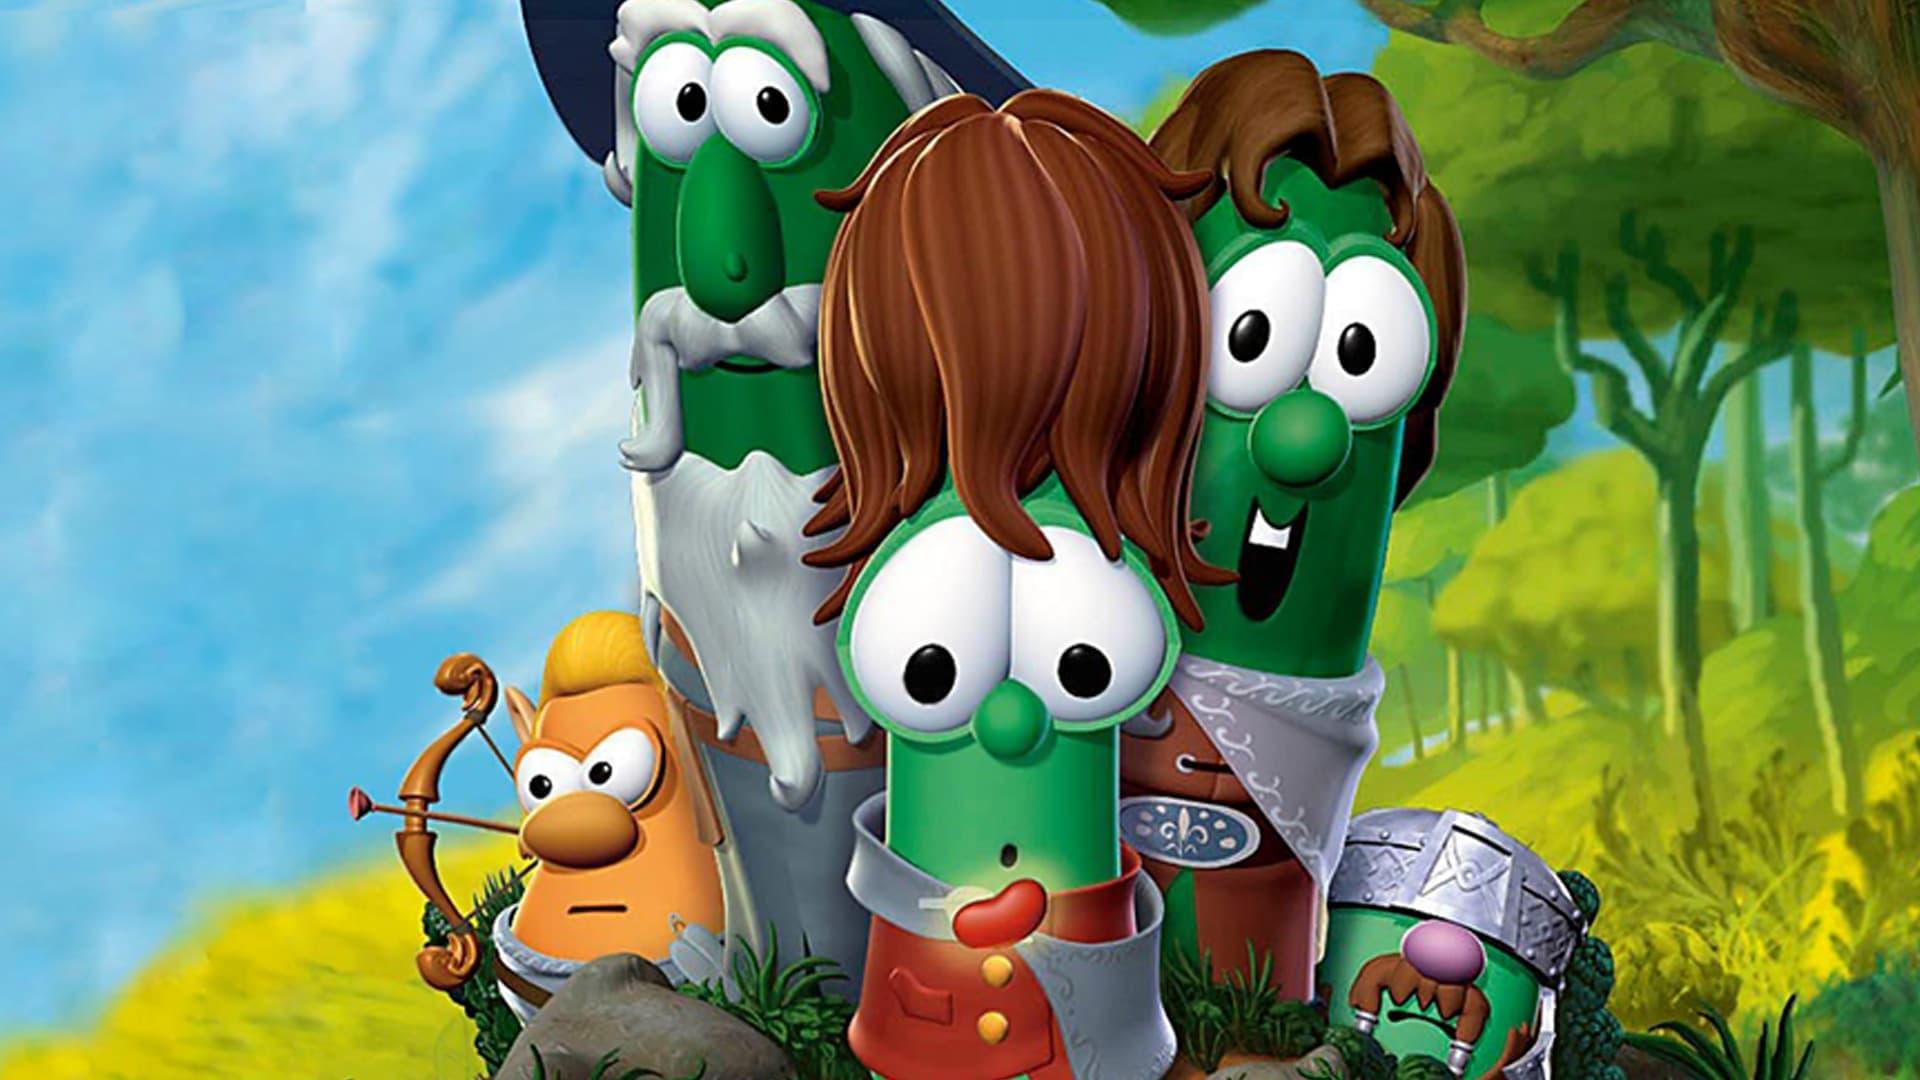 VeggieTales: Lord of the Beans backdrop